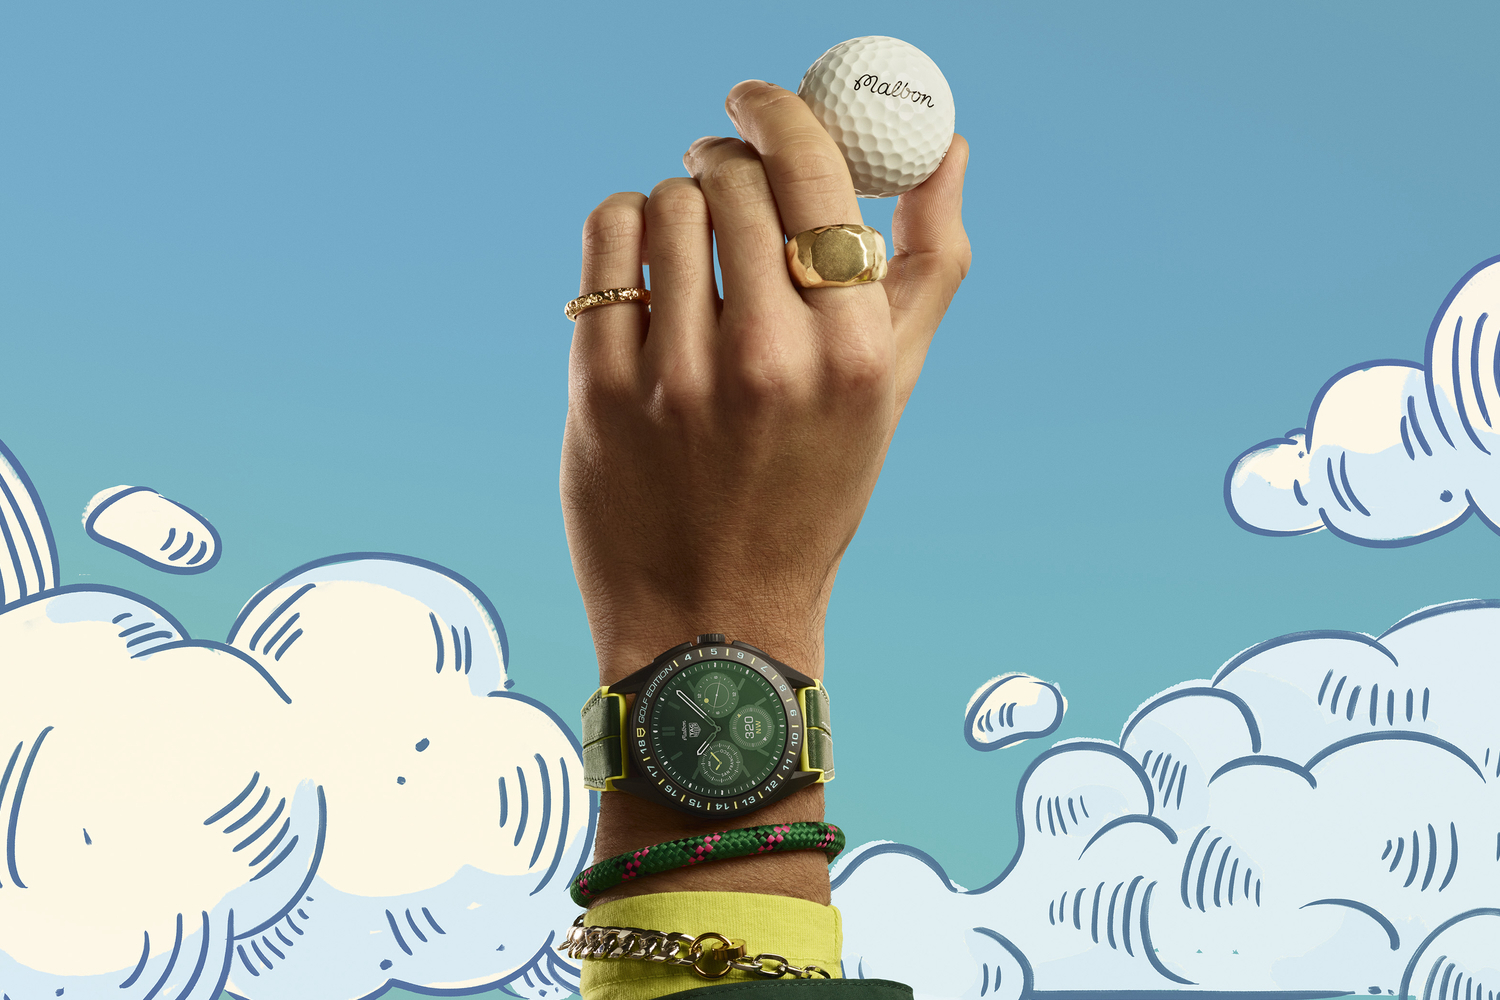 A Tag Heuer Connected Calibre E4 x Malbon Golf watch promotional image.